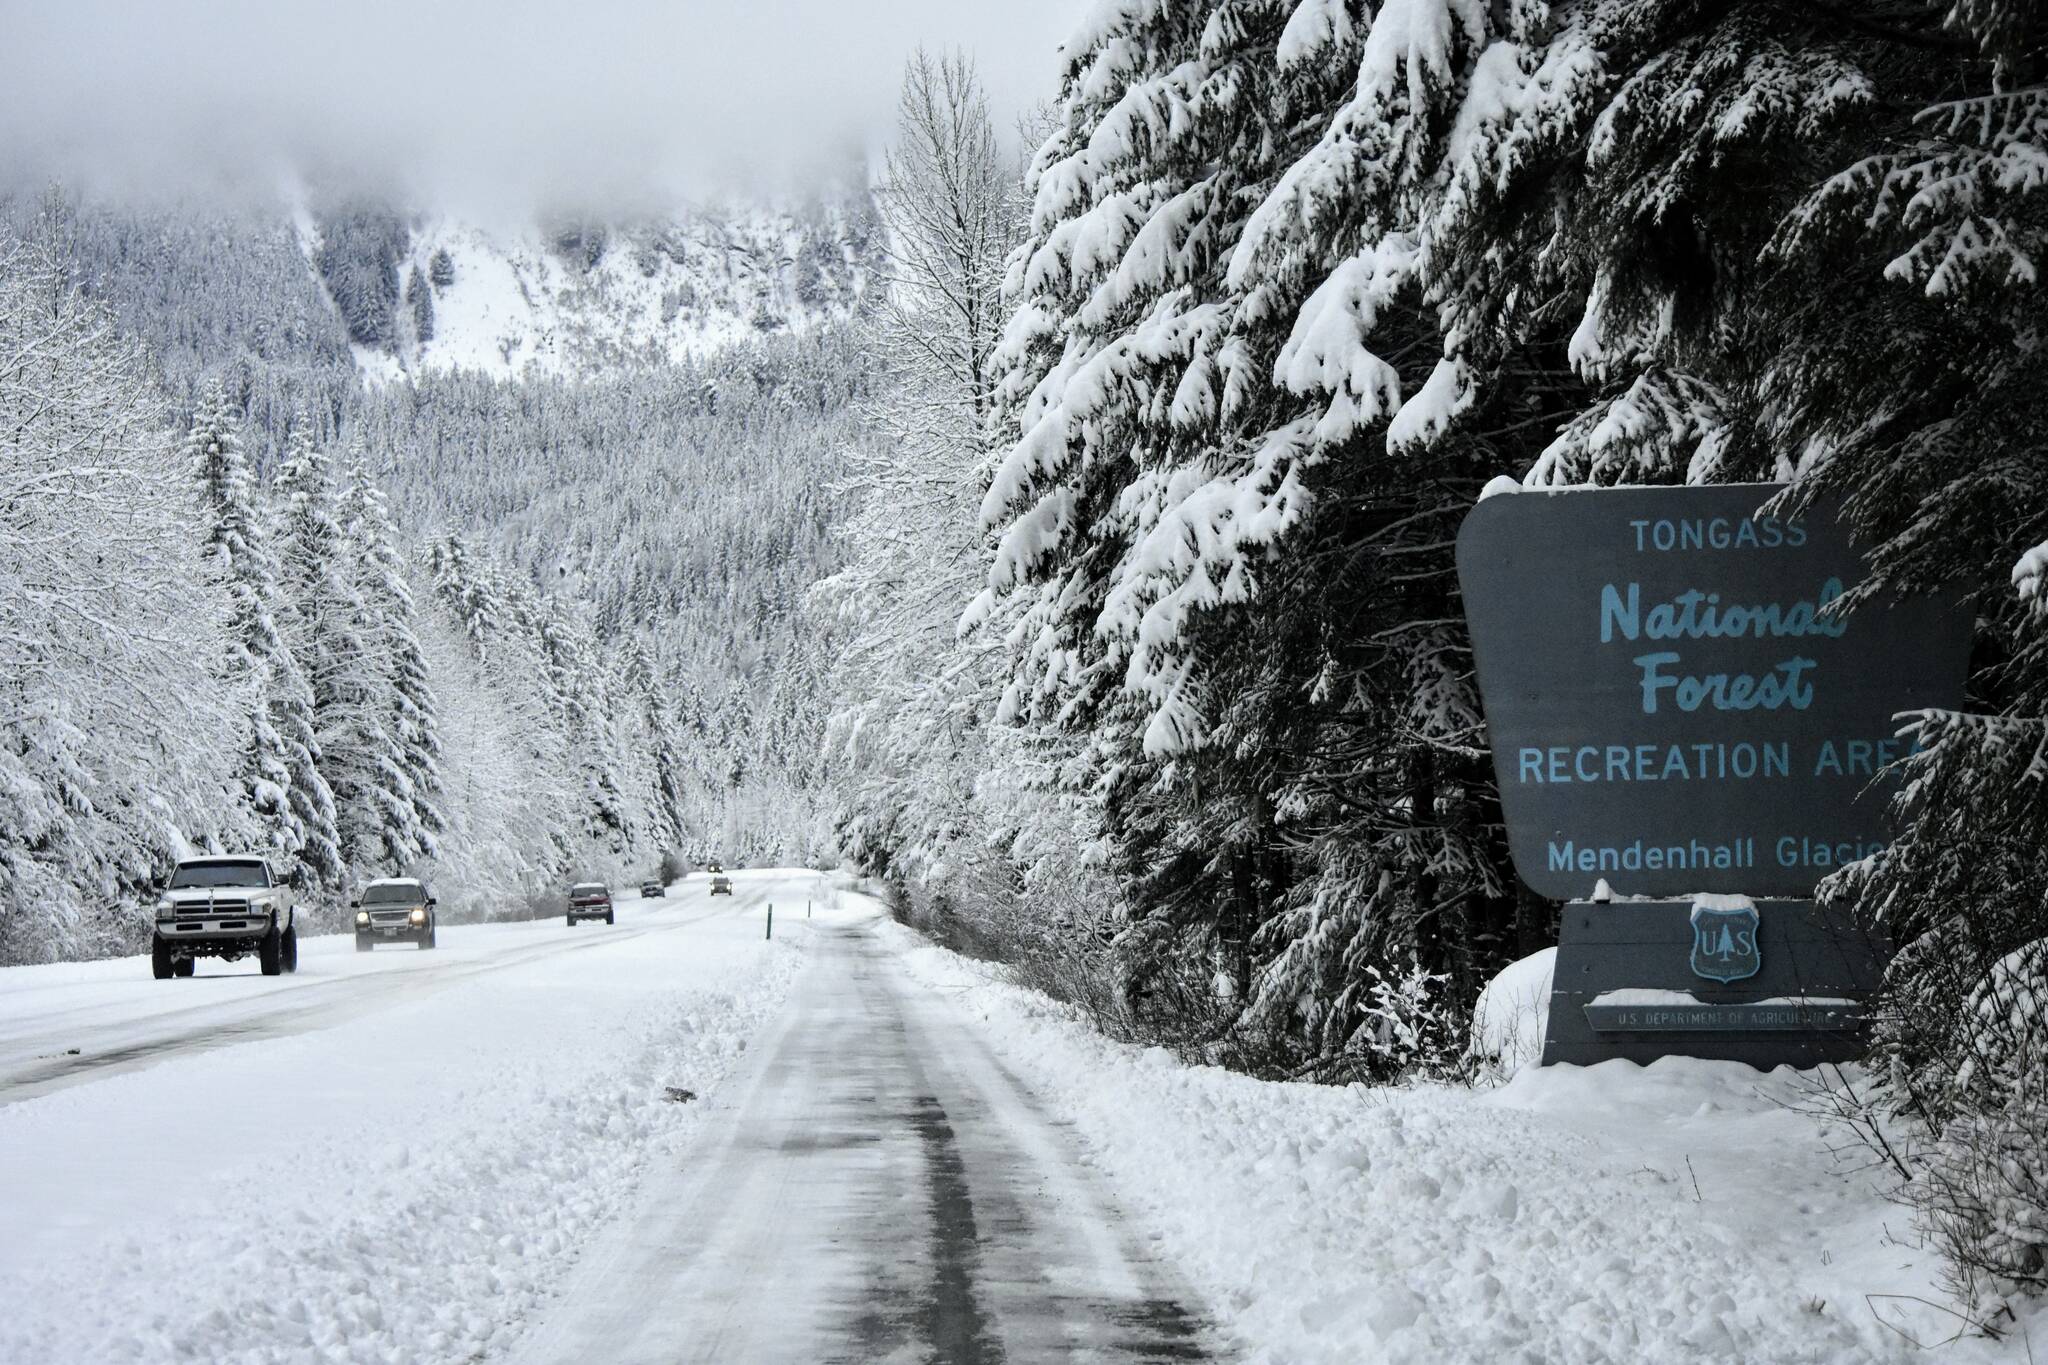 The entrance to the Mendenhall Glacier Recreation Area in the Tongass National Forest was covered in snow on Friday, Nov. 19, 2021, a day after federal authorities announced the next step in restoring the 2001 Roadless Rule on the forest. (Peter Segall / Juneau Empire)